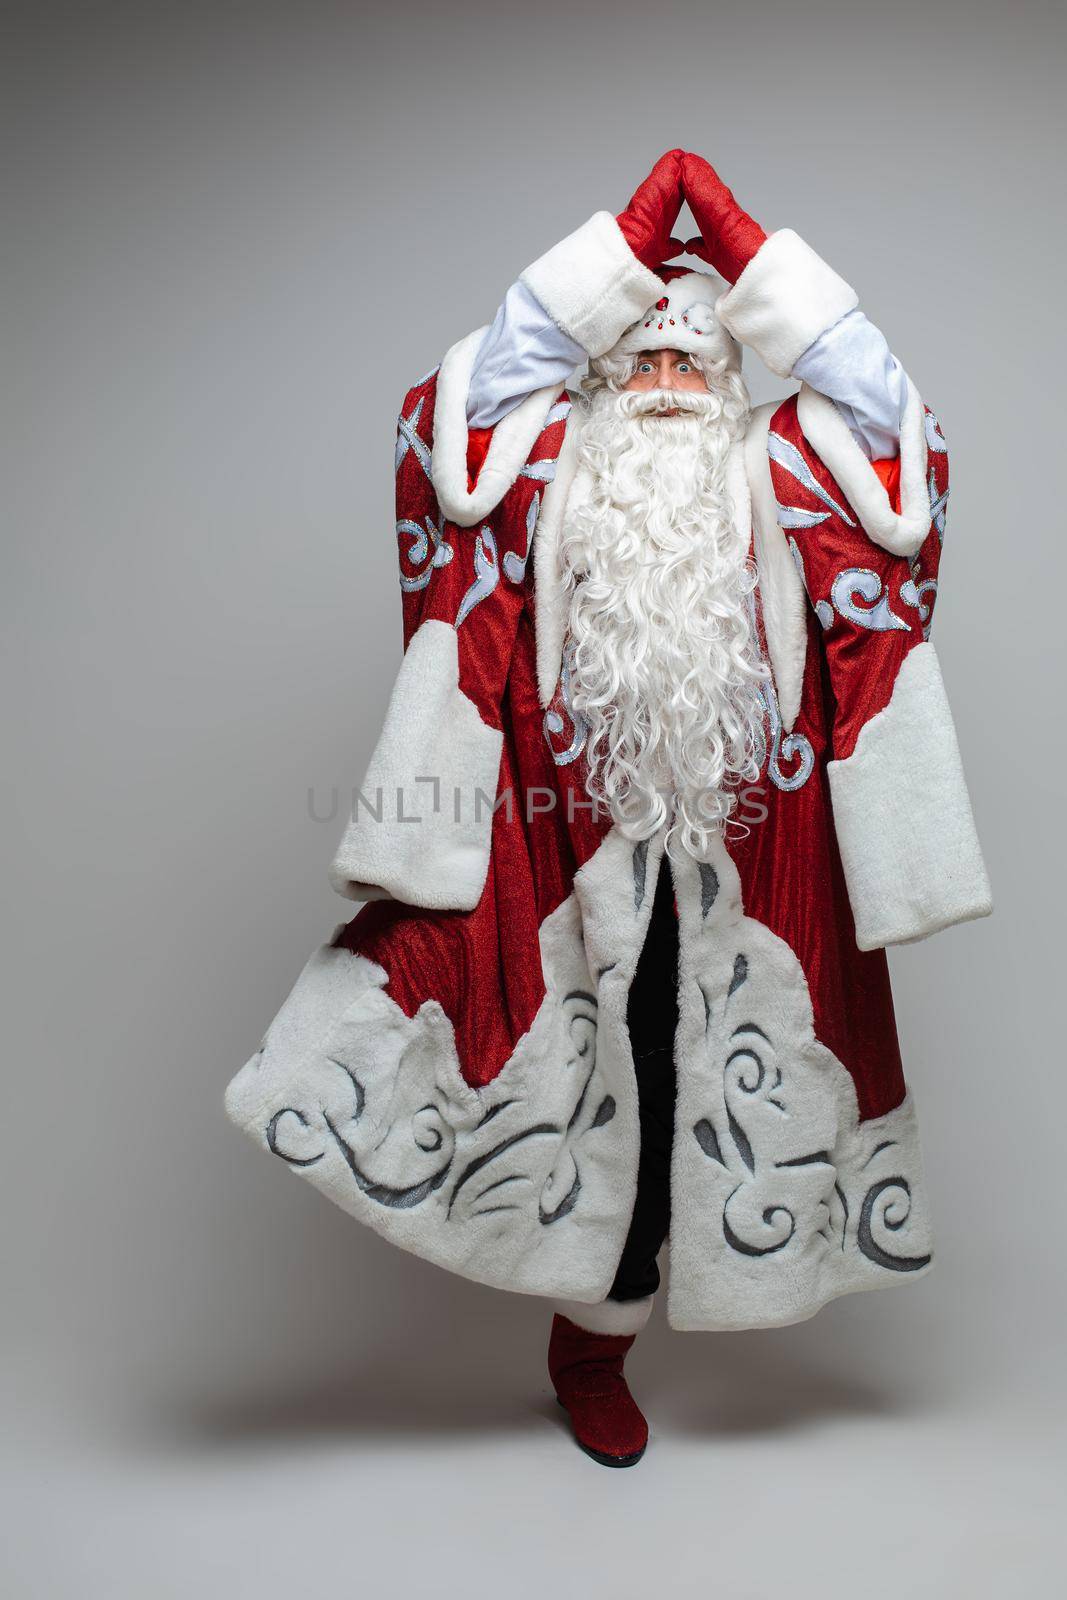 Stock photo of smiling happy Santa in traditional hat with rhinestones and long white beard looking at camera. Cutout on red background. Happiness concept.